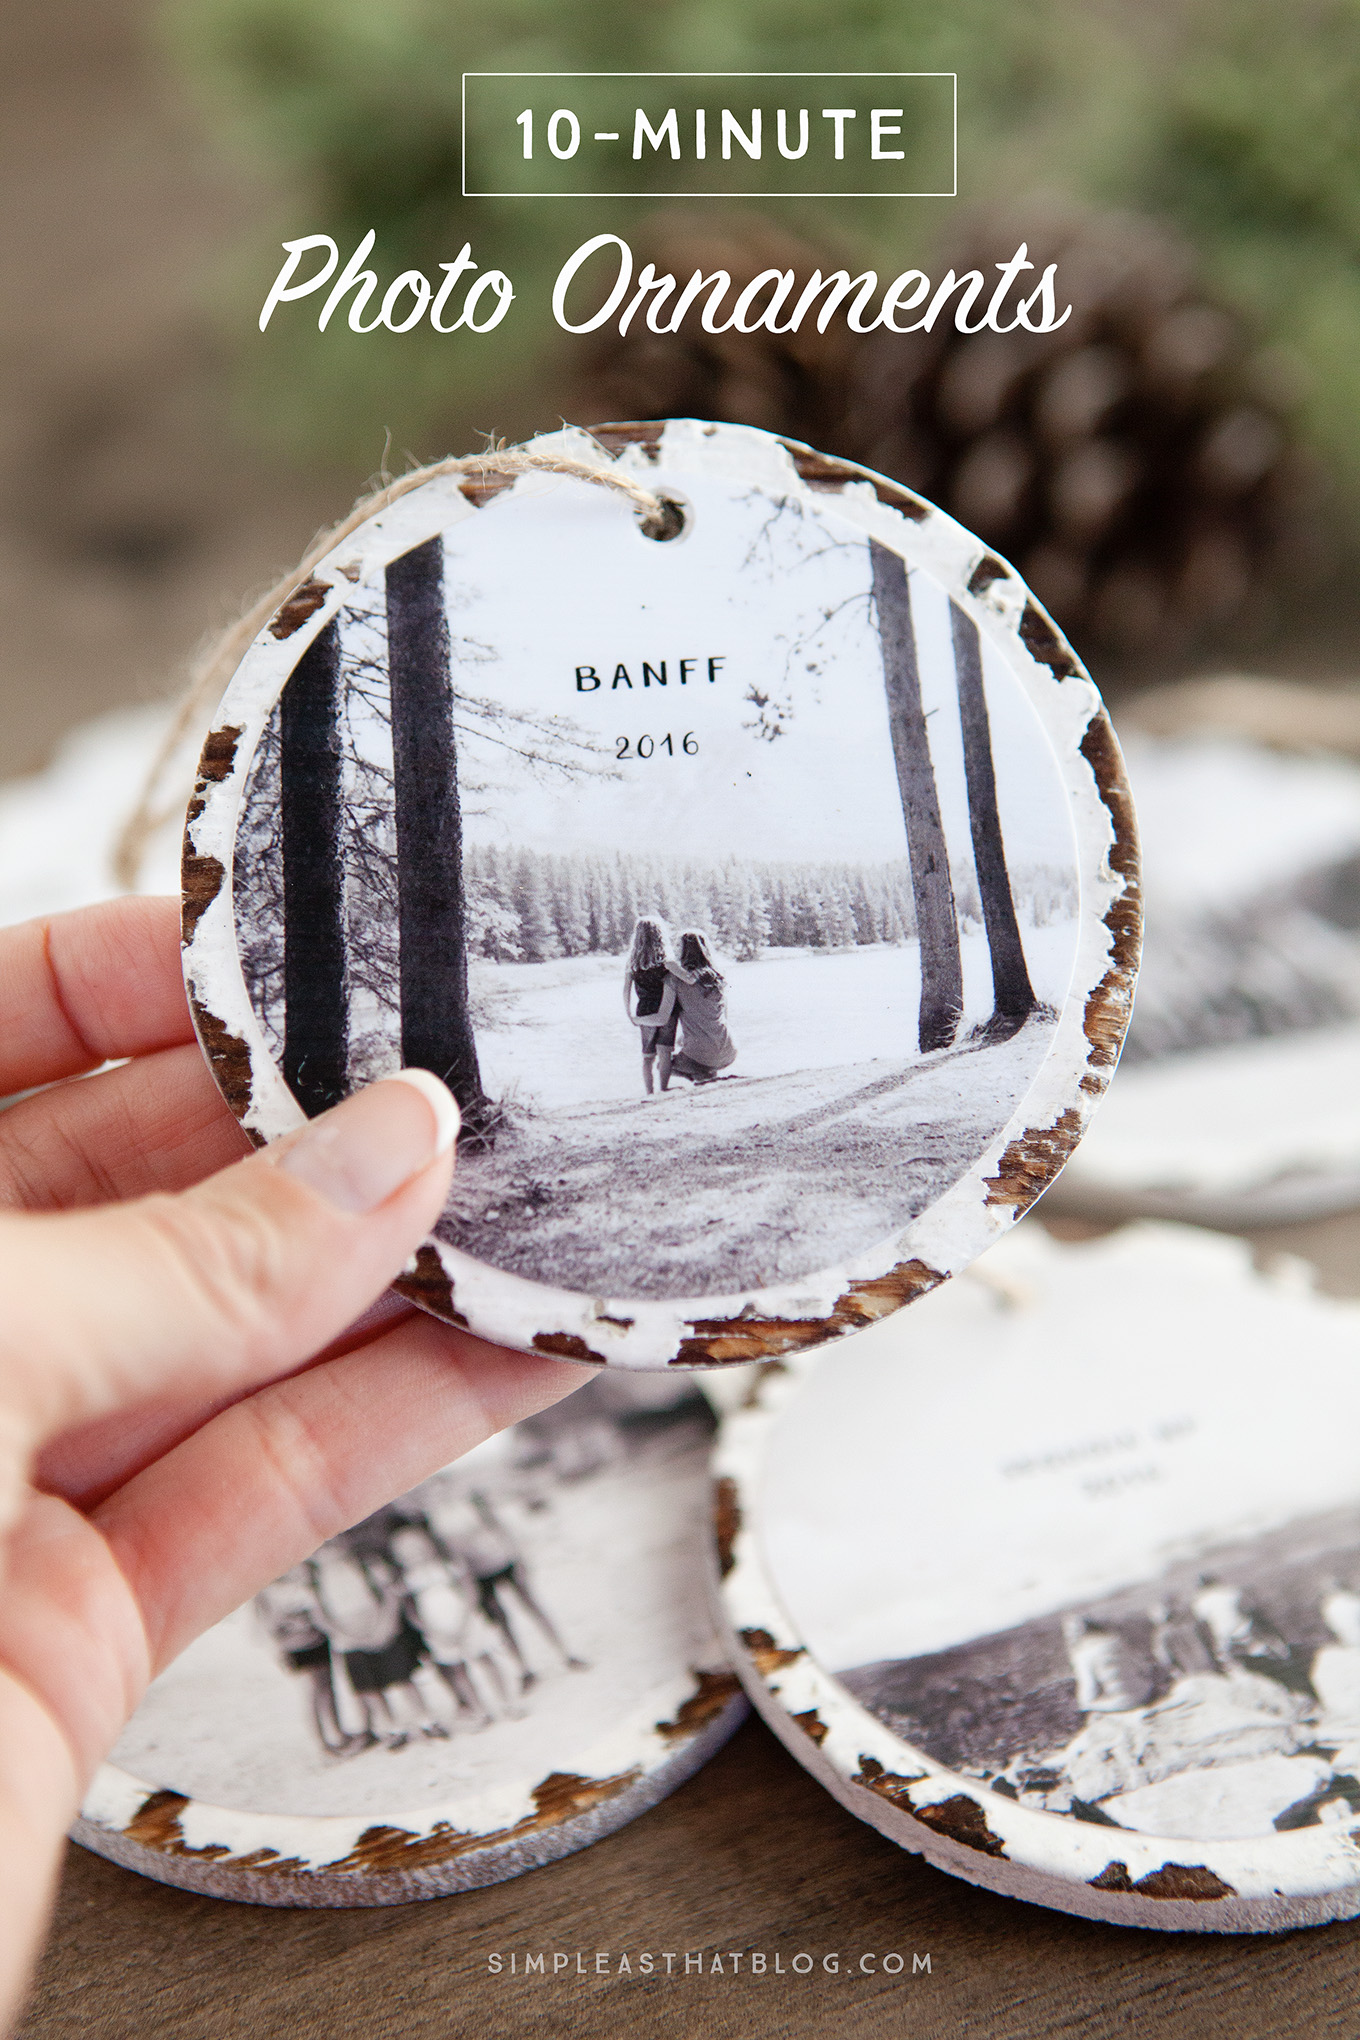 Trim the tree with these 10 minute photo keepsake ornaments. They take no time at all to make and it will mean so much to fill the tree with family memories.